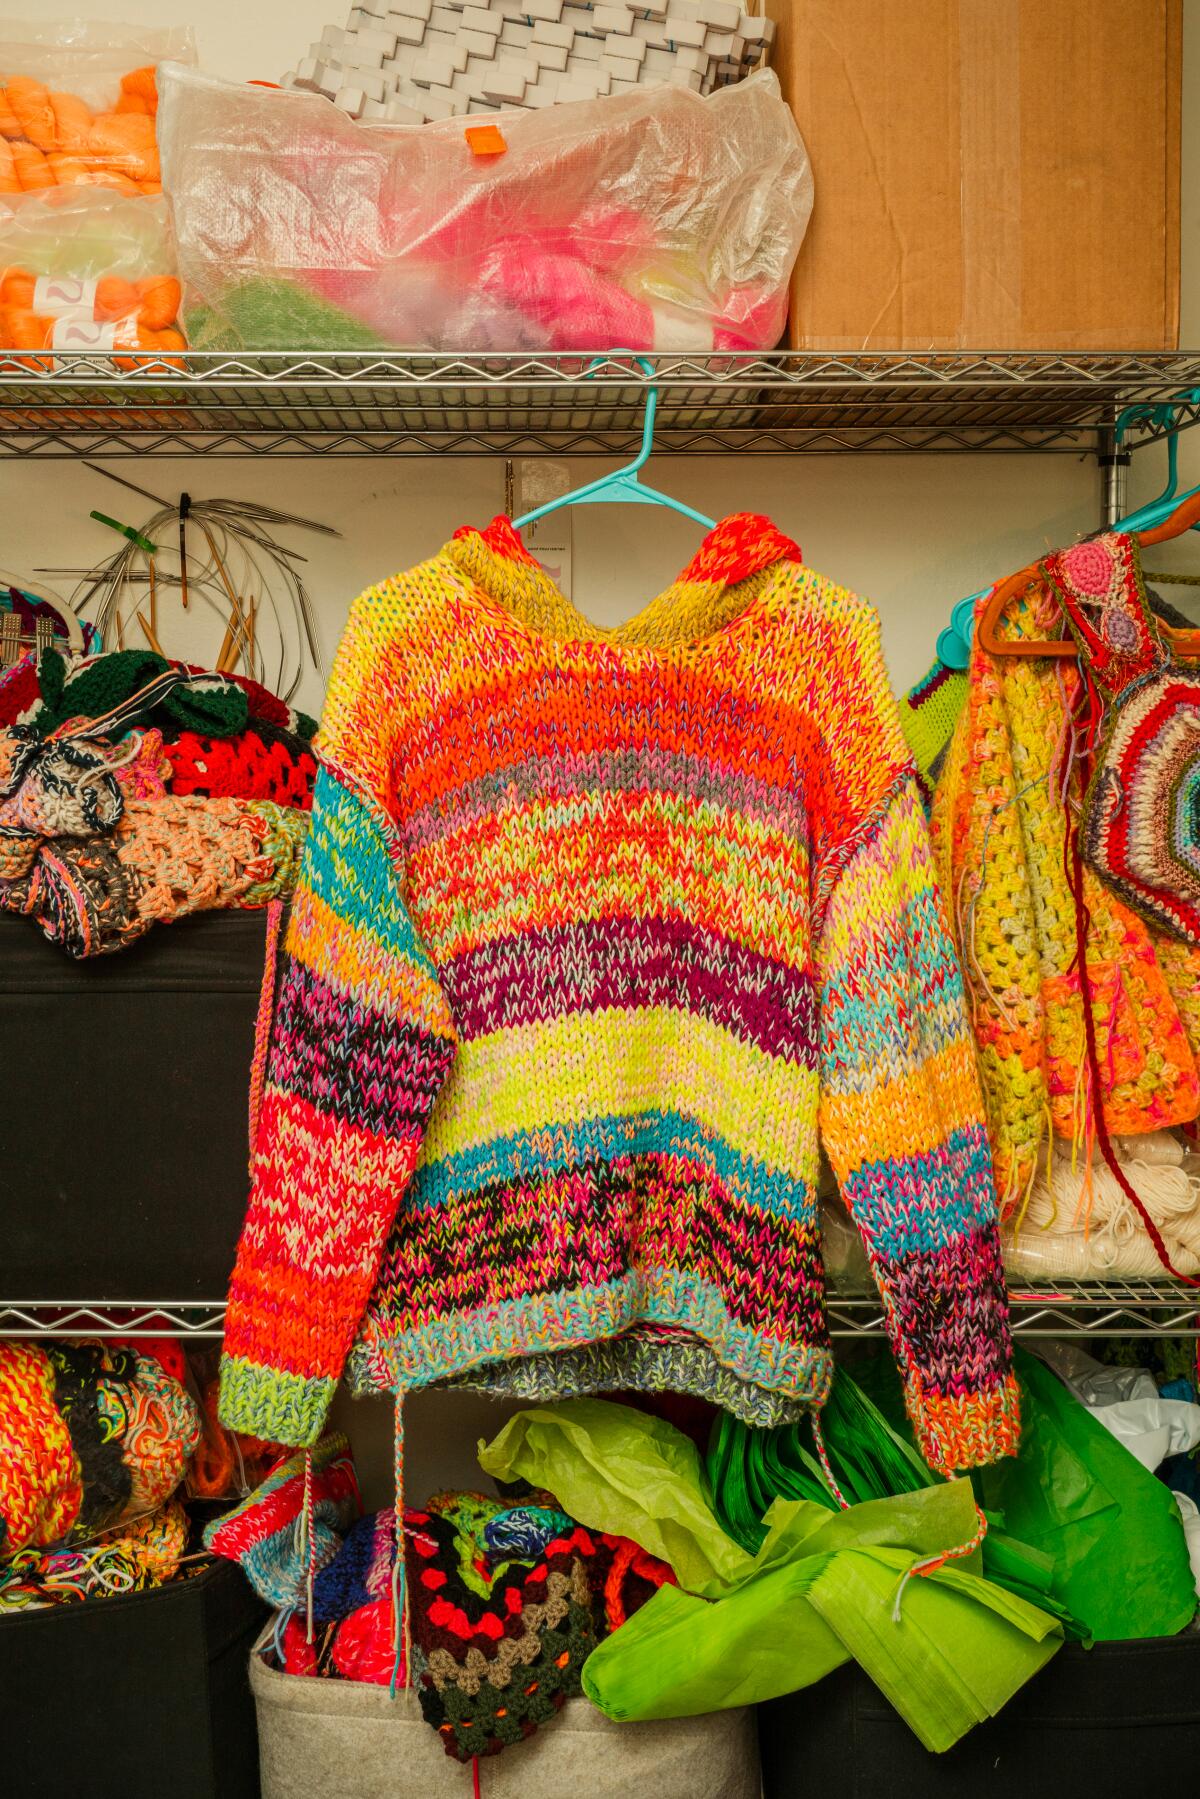 A knit sweater from Unlikely Fox's collection.